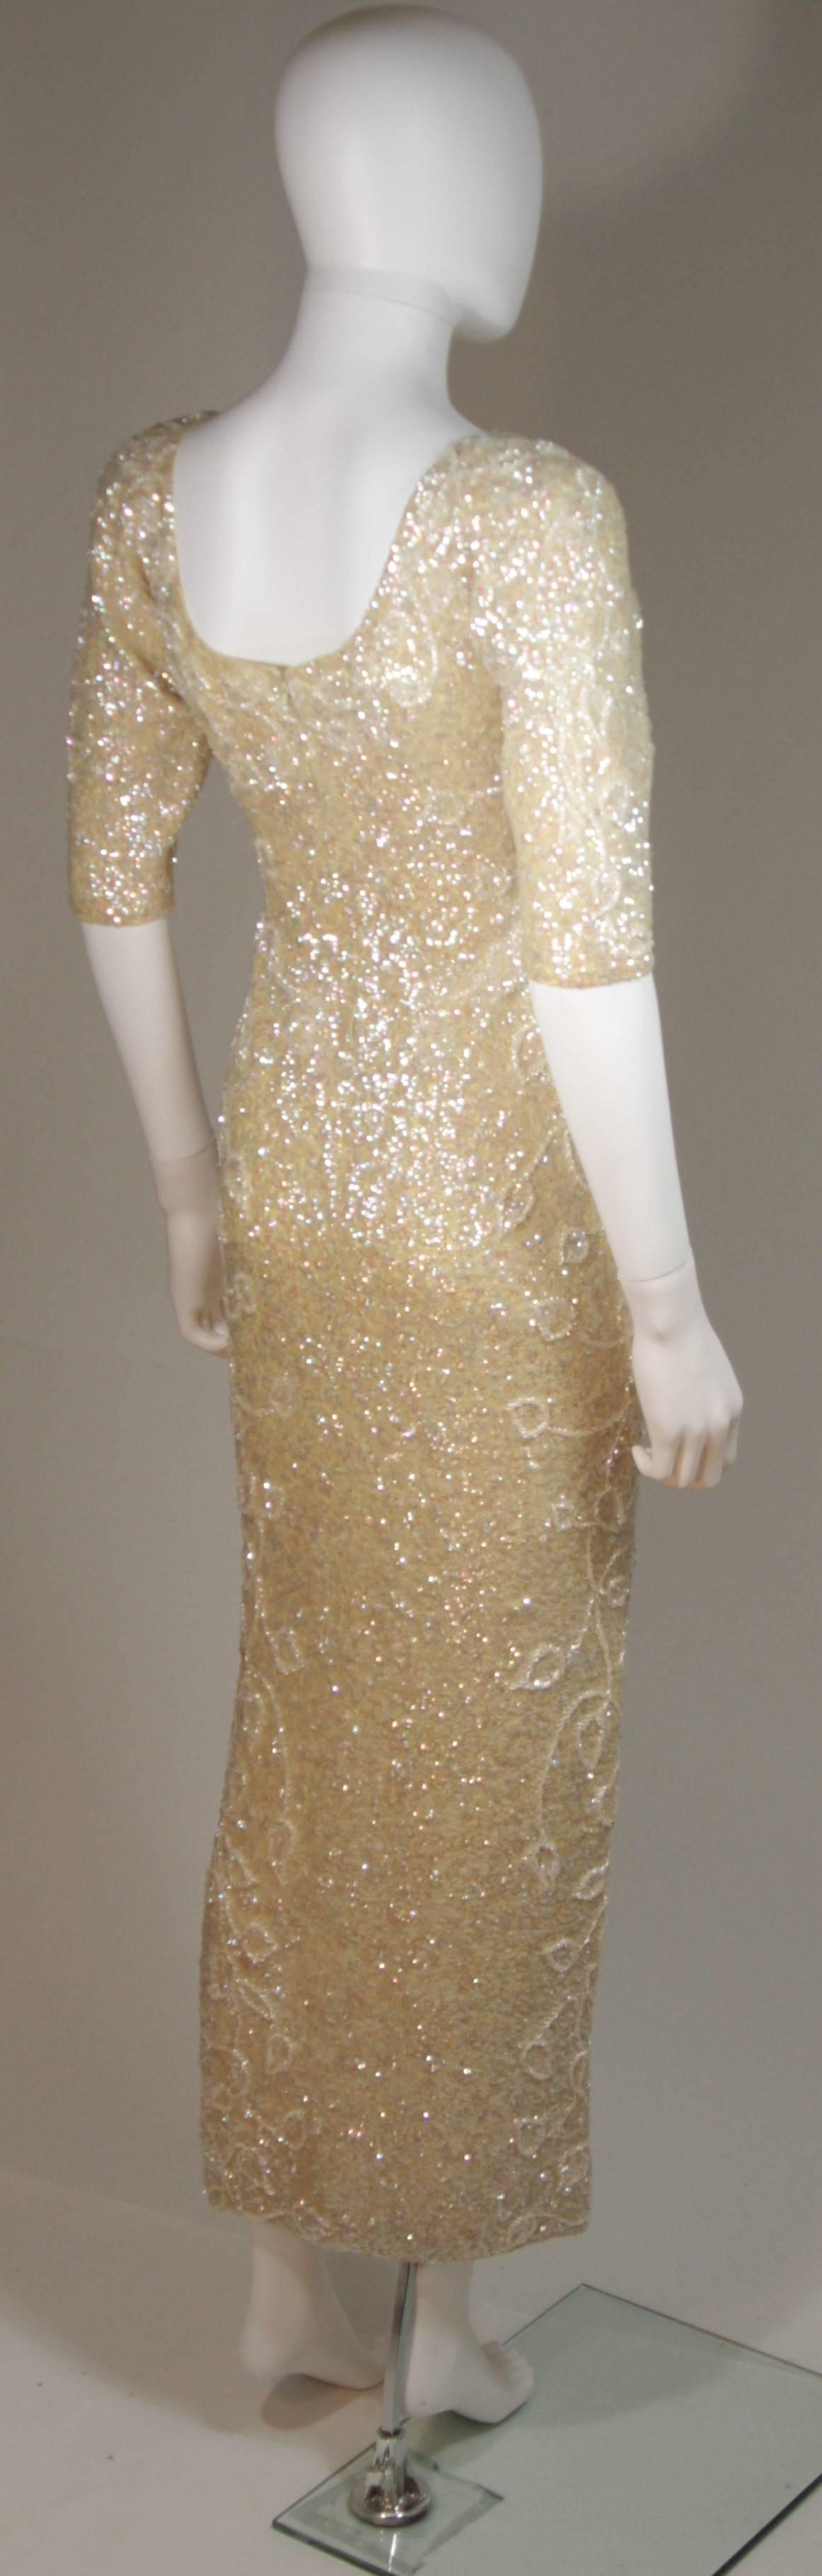 Gene Shelley's Yellow Floral Motif Iridescent Wool Knit Gown Size 6 In Excellent Condition For Sale In Los Angeles, CA